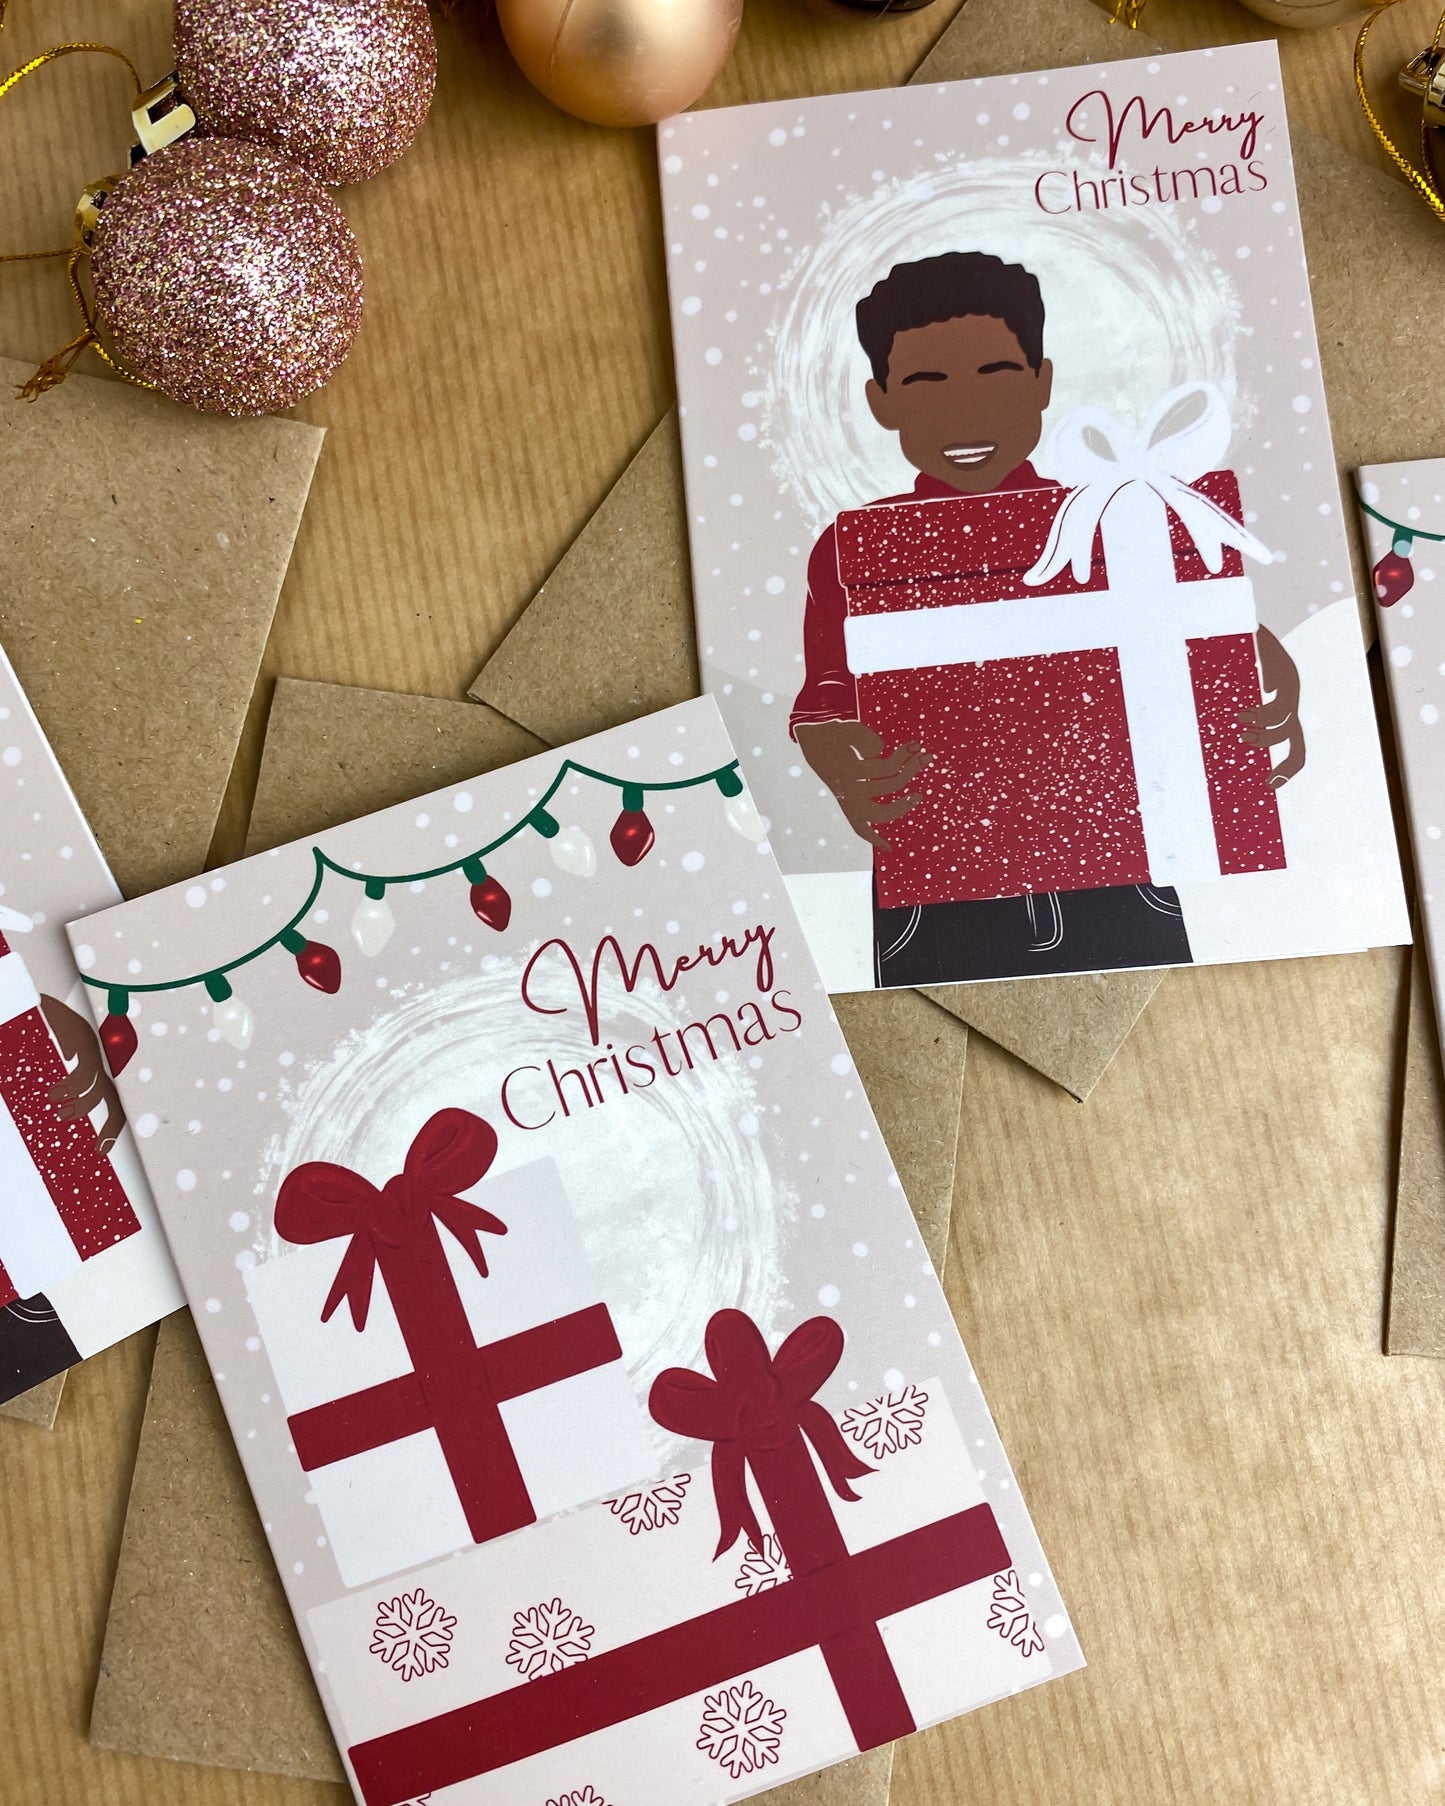 4 Pack Mini A7 Christmas Gifts - Christmas Card Multipack - Children's Seasons Greetings Cards Diverse Black Greeting Cards